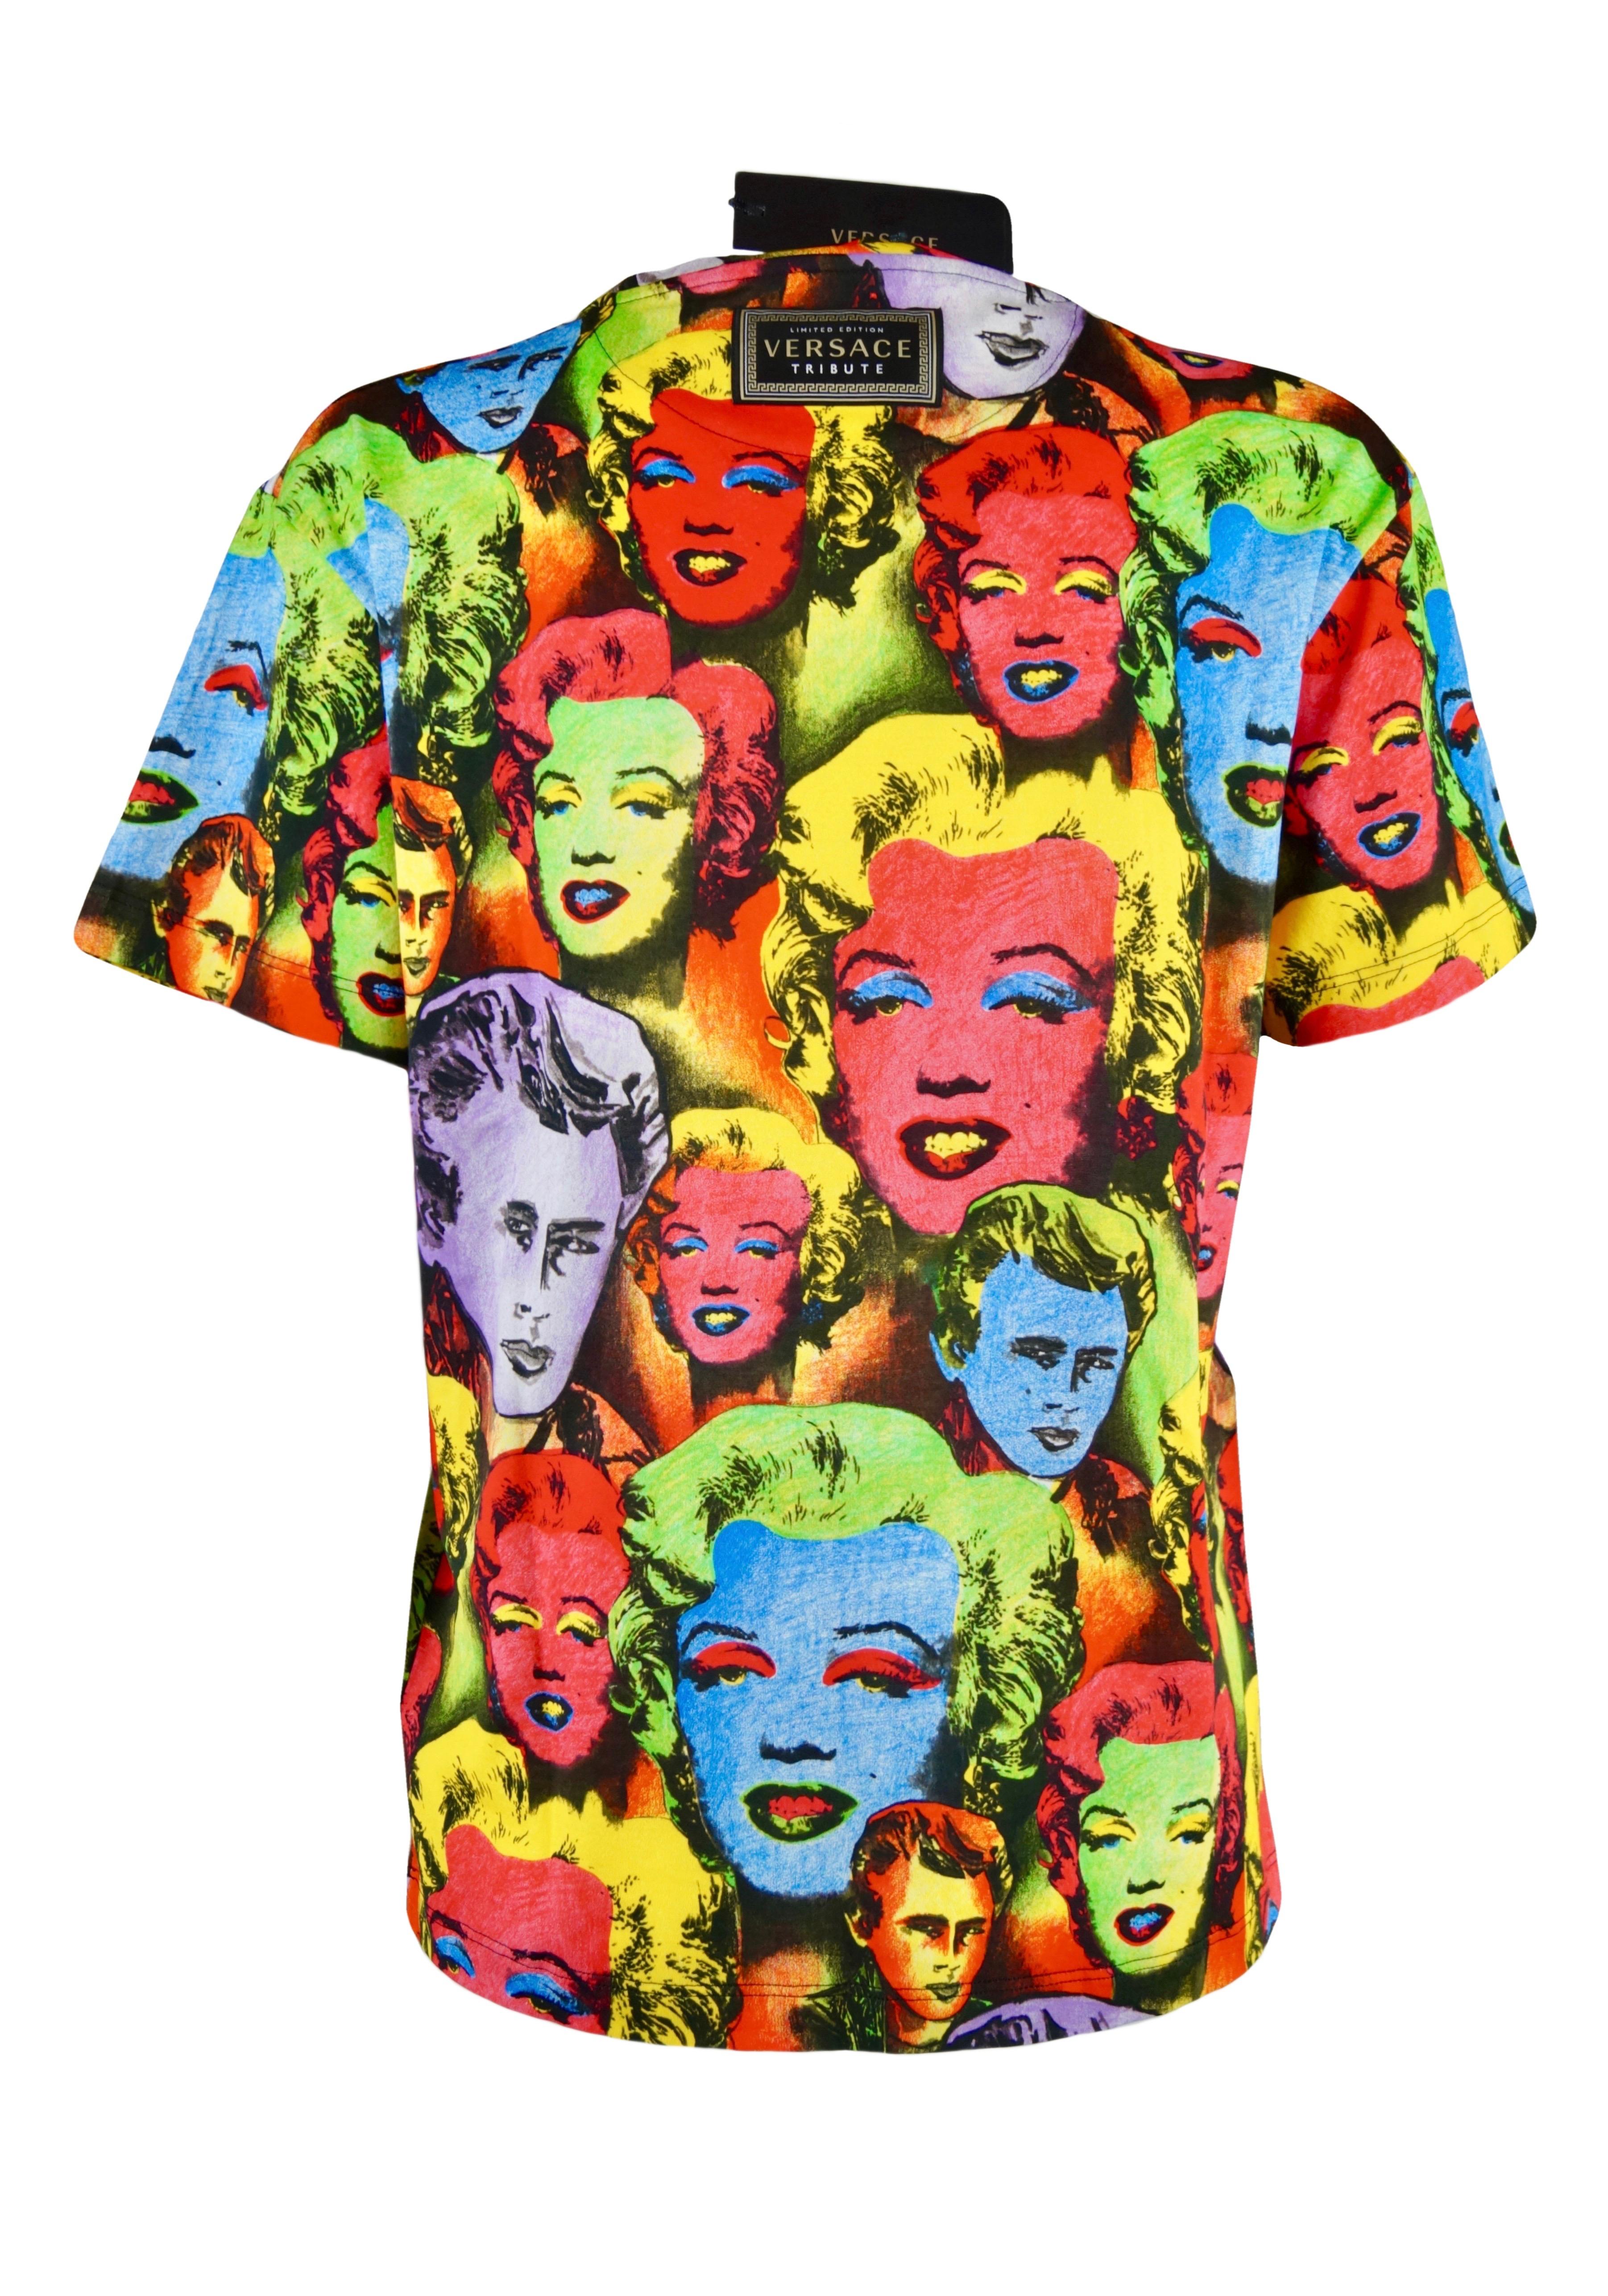 VERSACE Tribute 2017
WARHOL SS 1991 T-Shirt
Limited Edition 
Size S
Unisex
Made in Italy
Flat measures:
Length cm. 65
Shoulders cm. 48
Bust cm. 49.5
Sleeve cm. 18.5
New with tag, never used